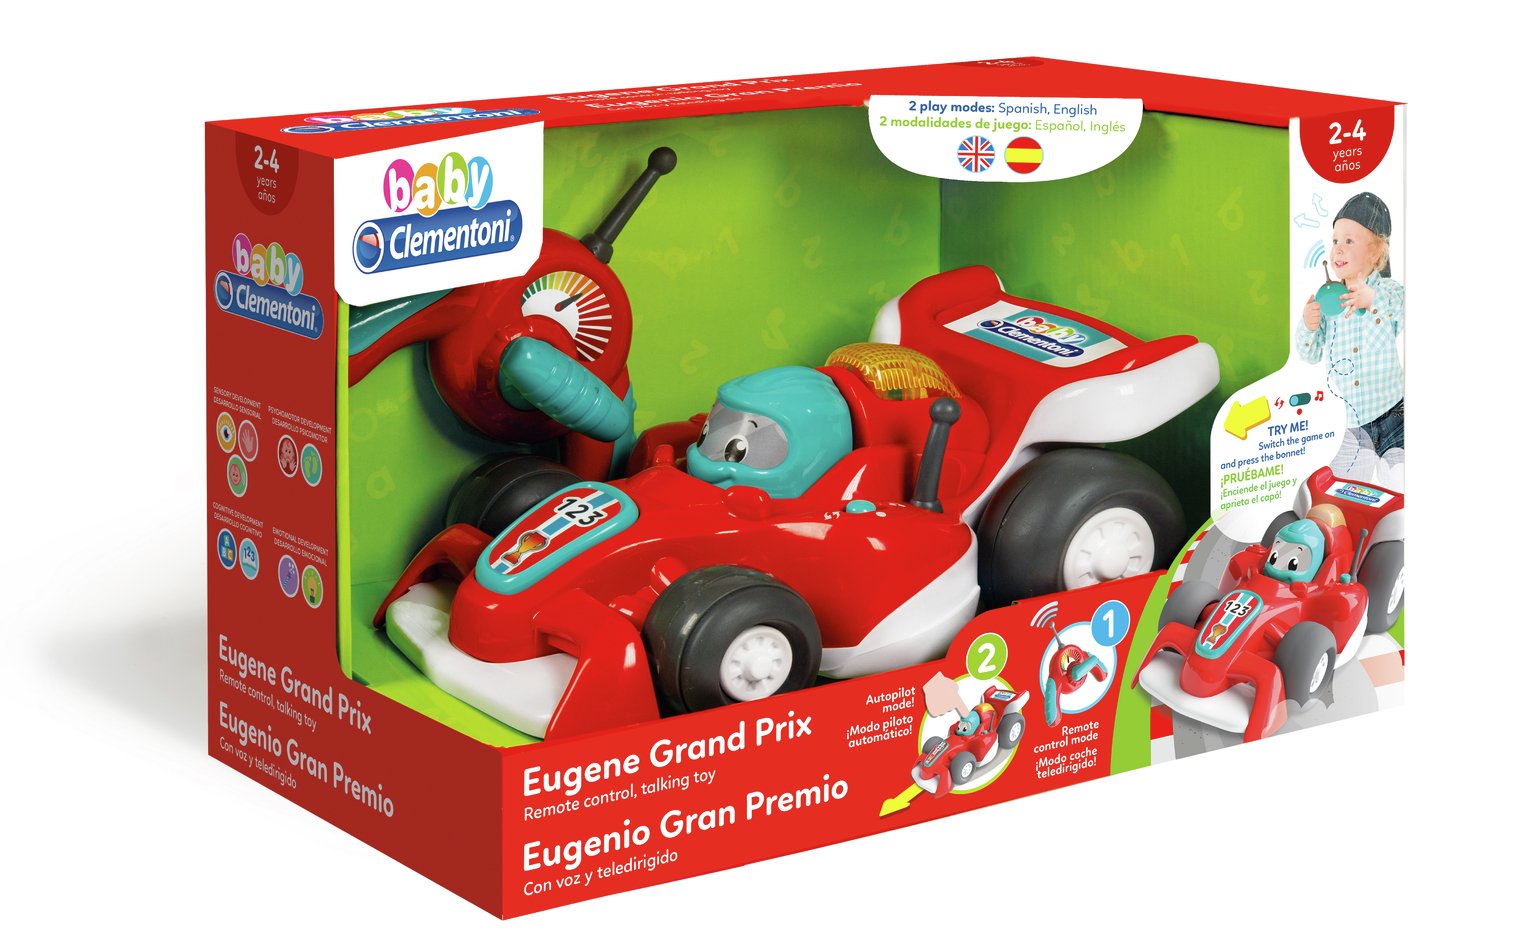 Baby Clementoni Lewis Radio Controlled Vehicle Review